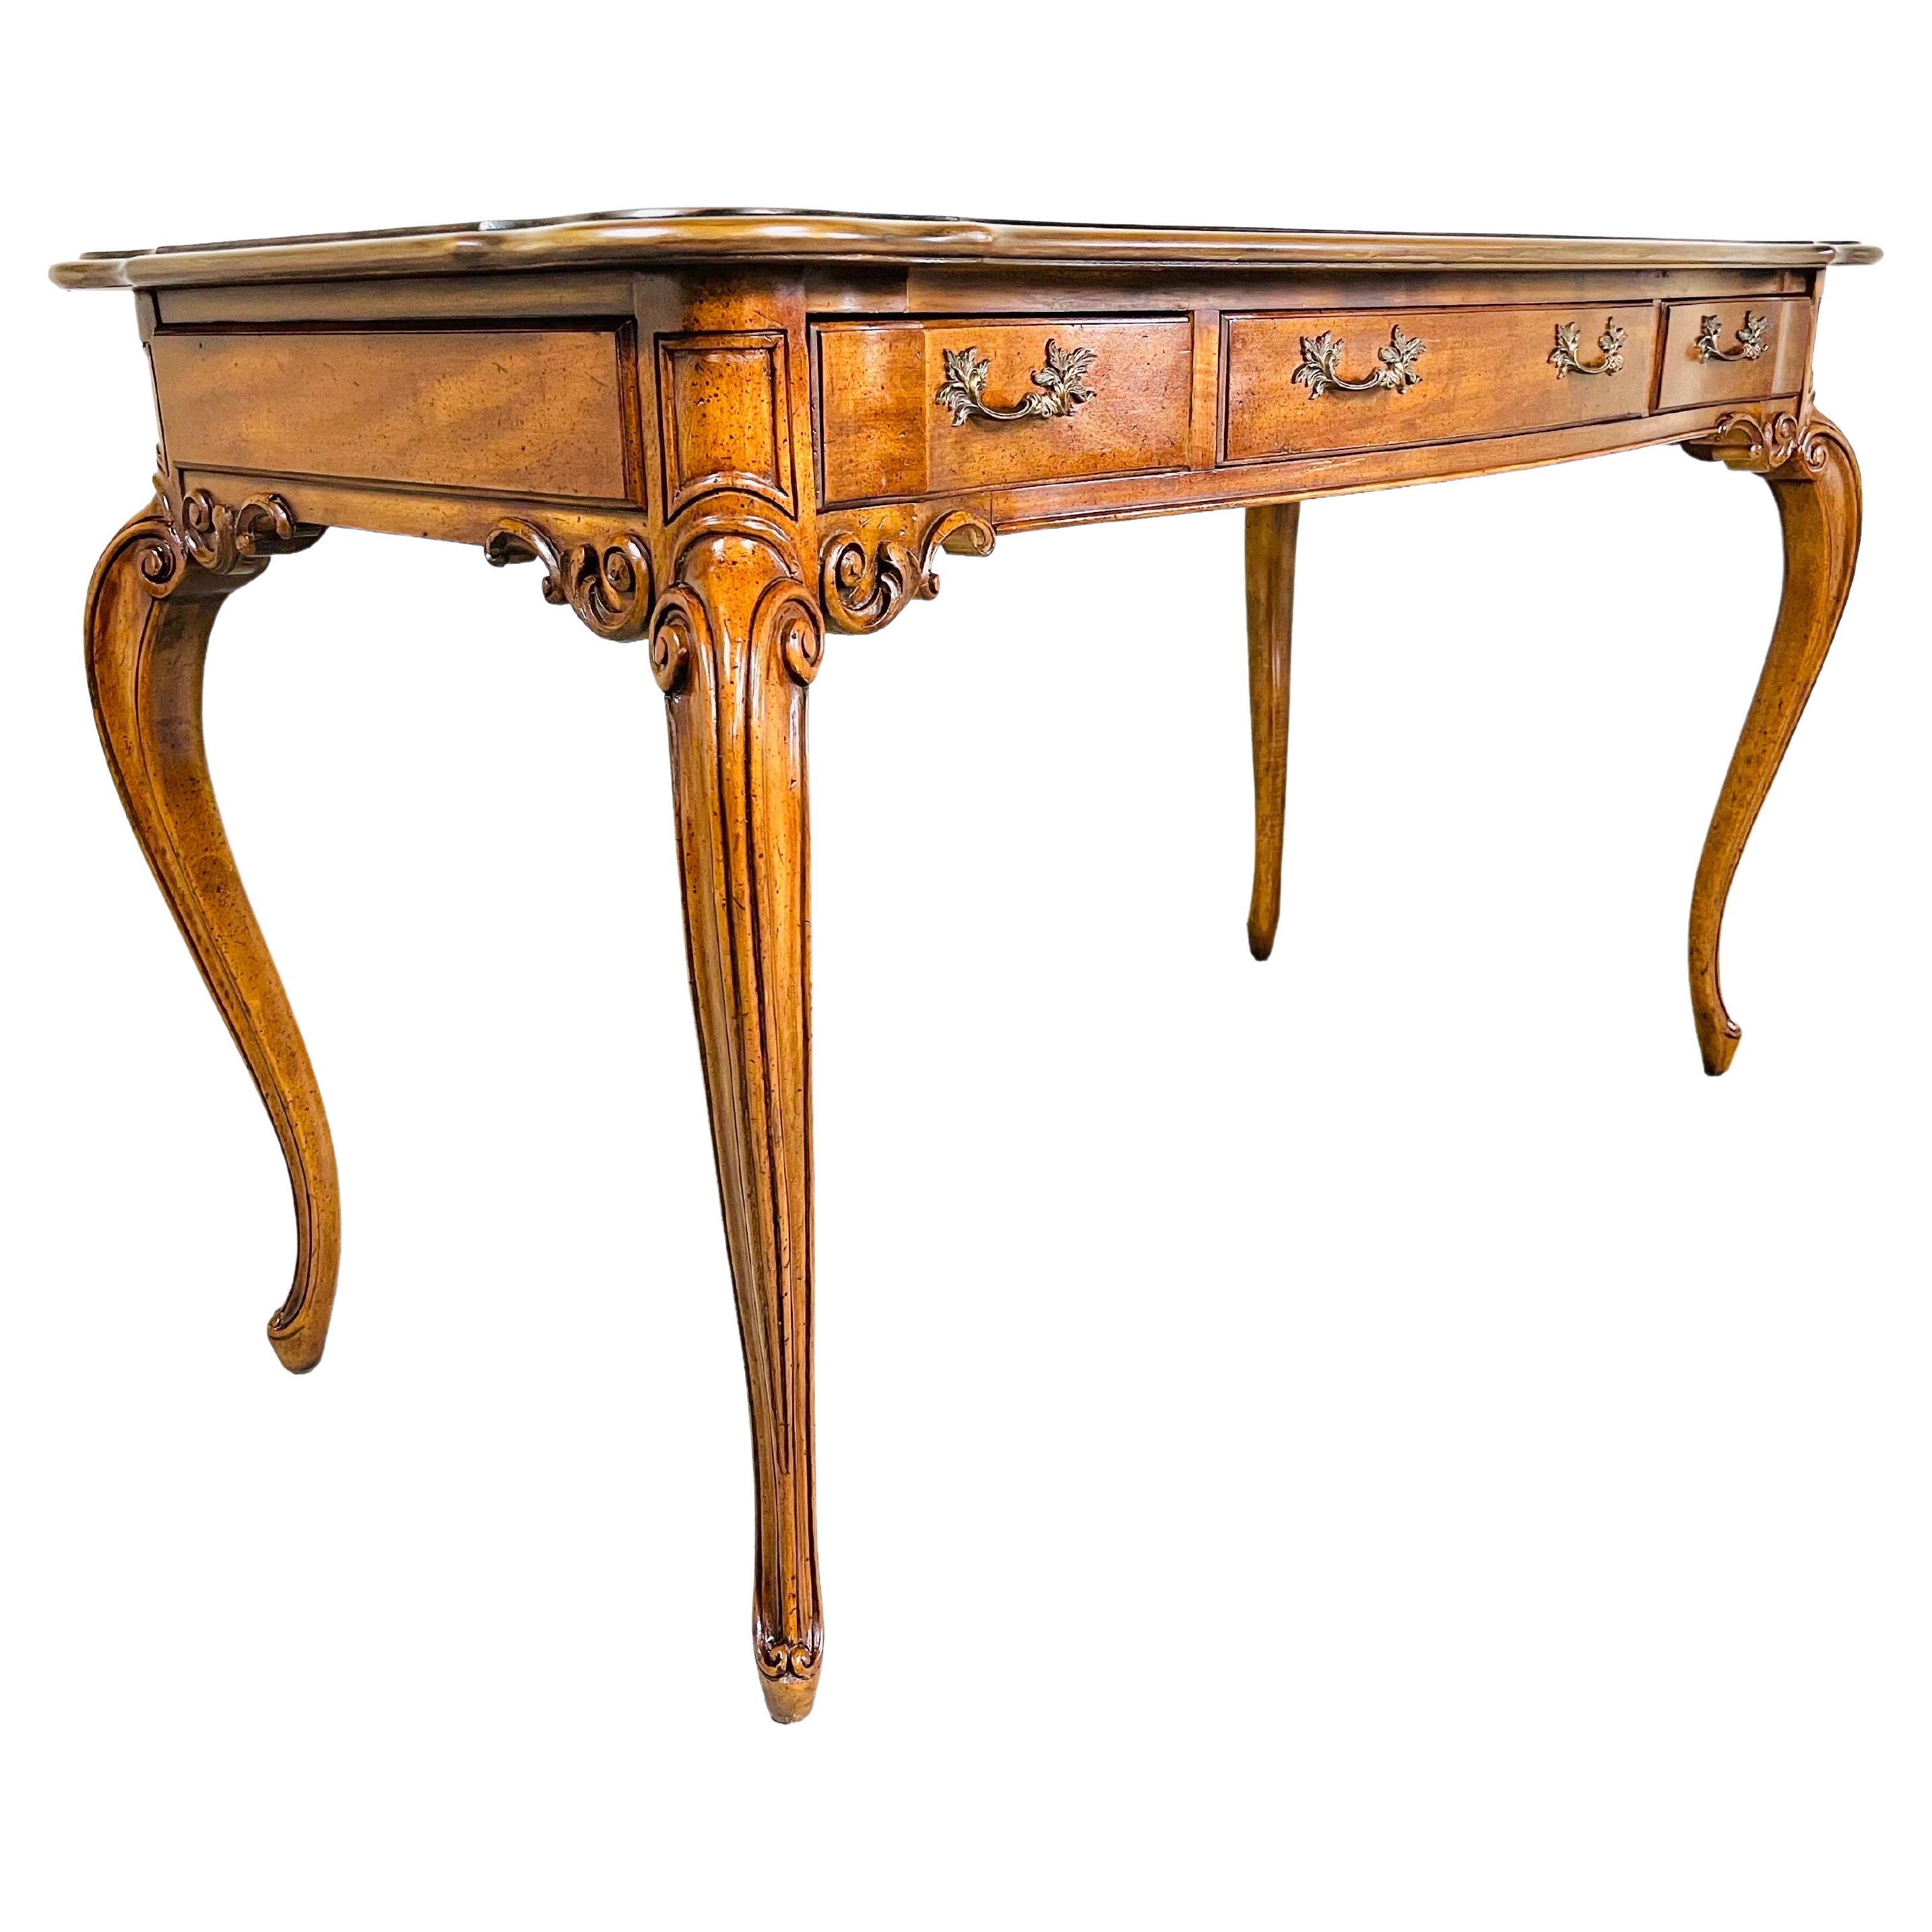 Baker Louis XV Style 3-Drawer Parquetry Writing Desk or Table in Walnut